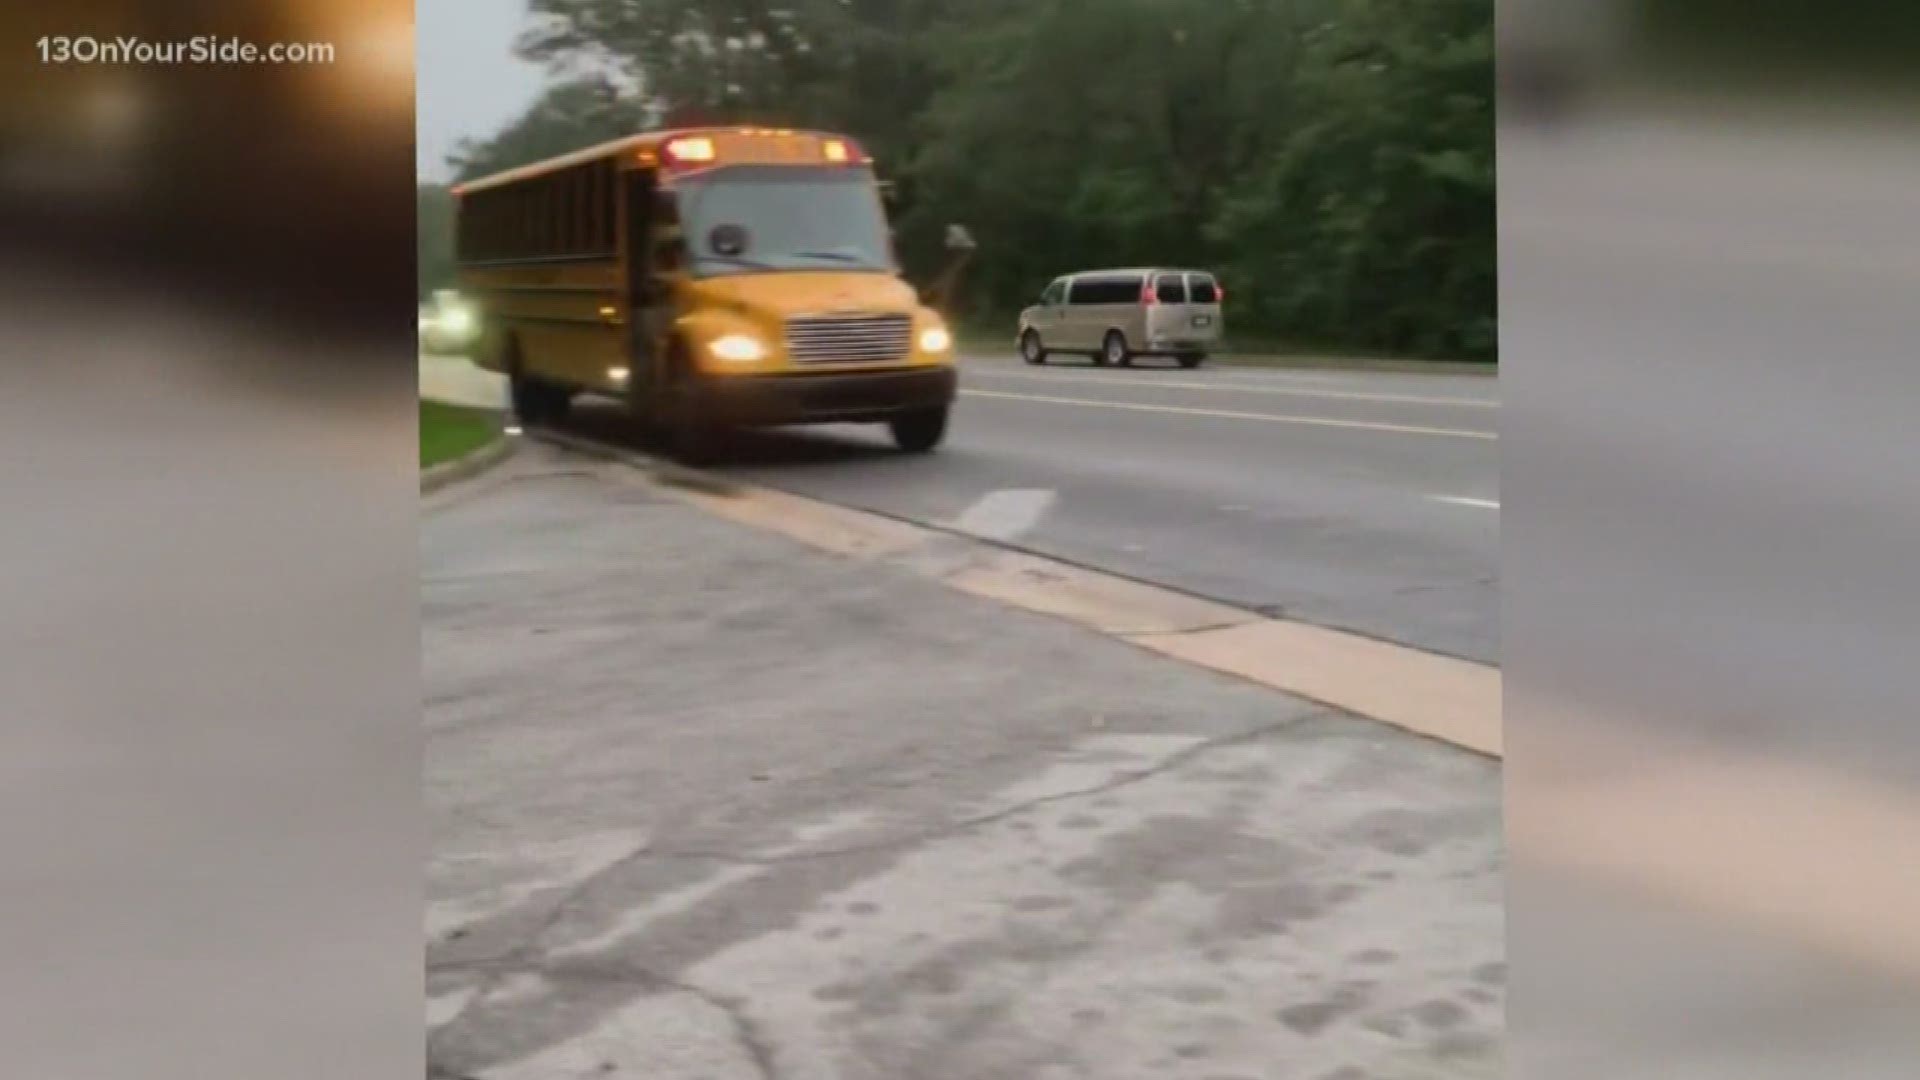 Unless there's a physical barrier or unpaved median, drivers on both sides of a road must stop for school buses.